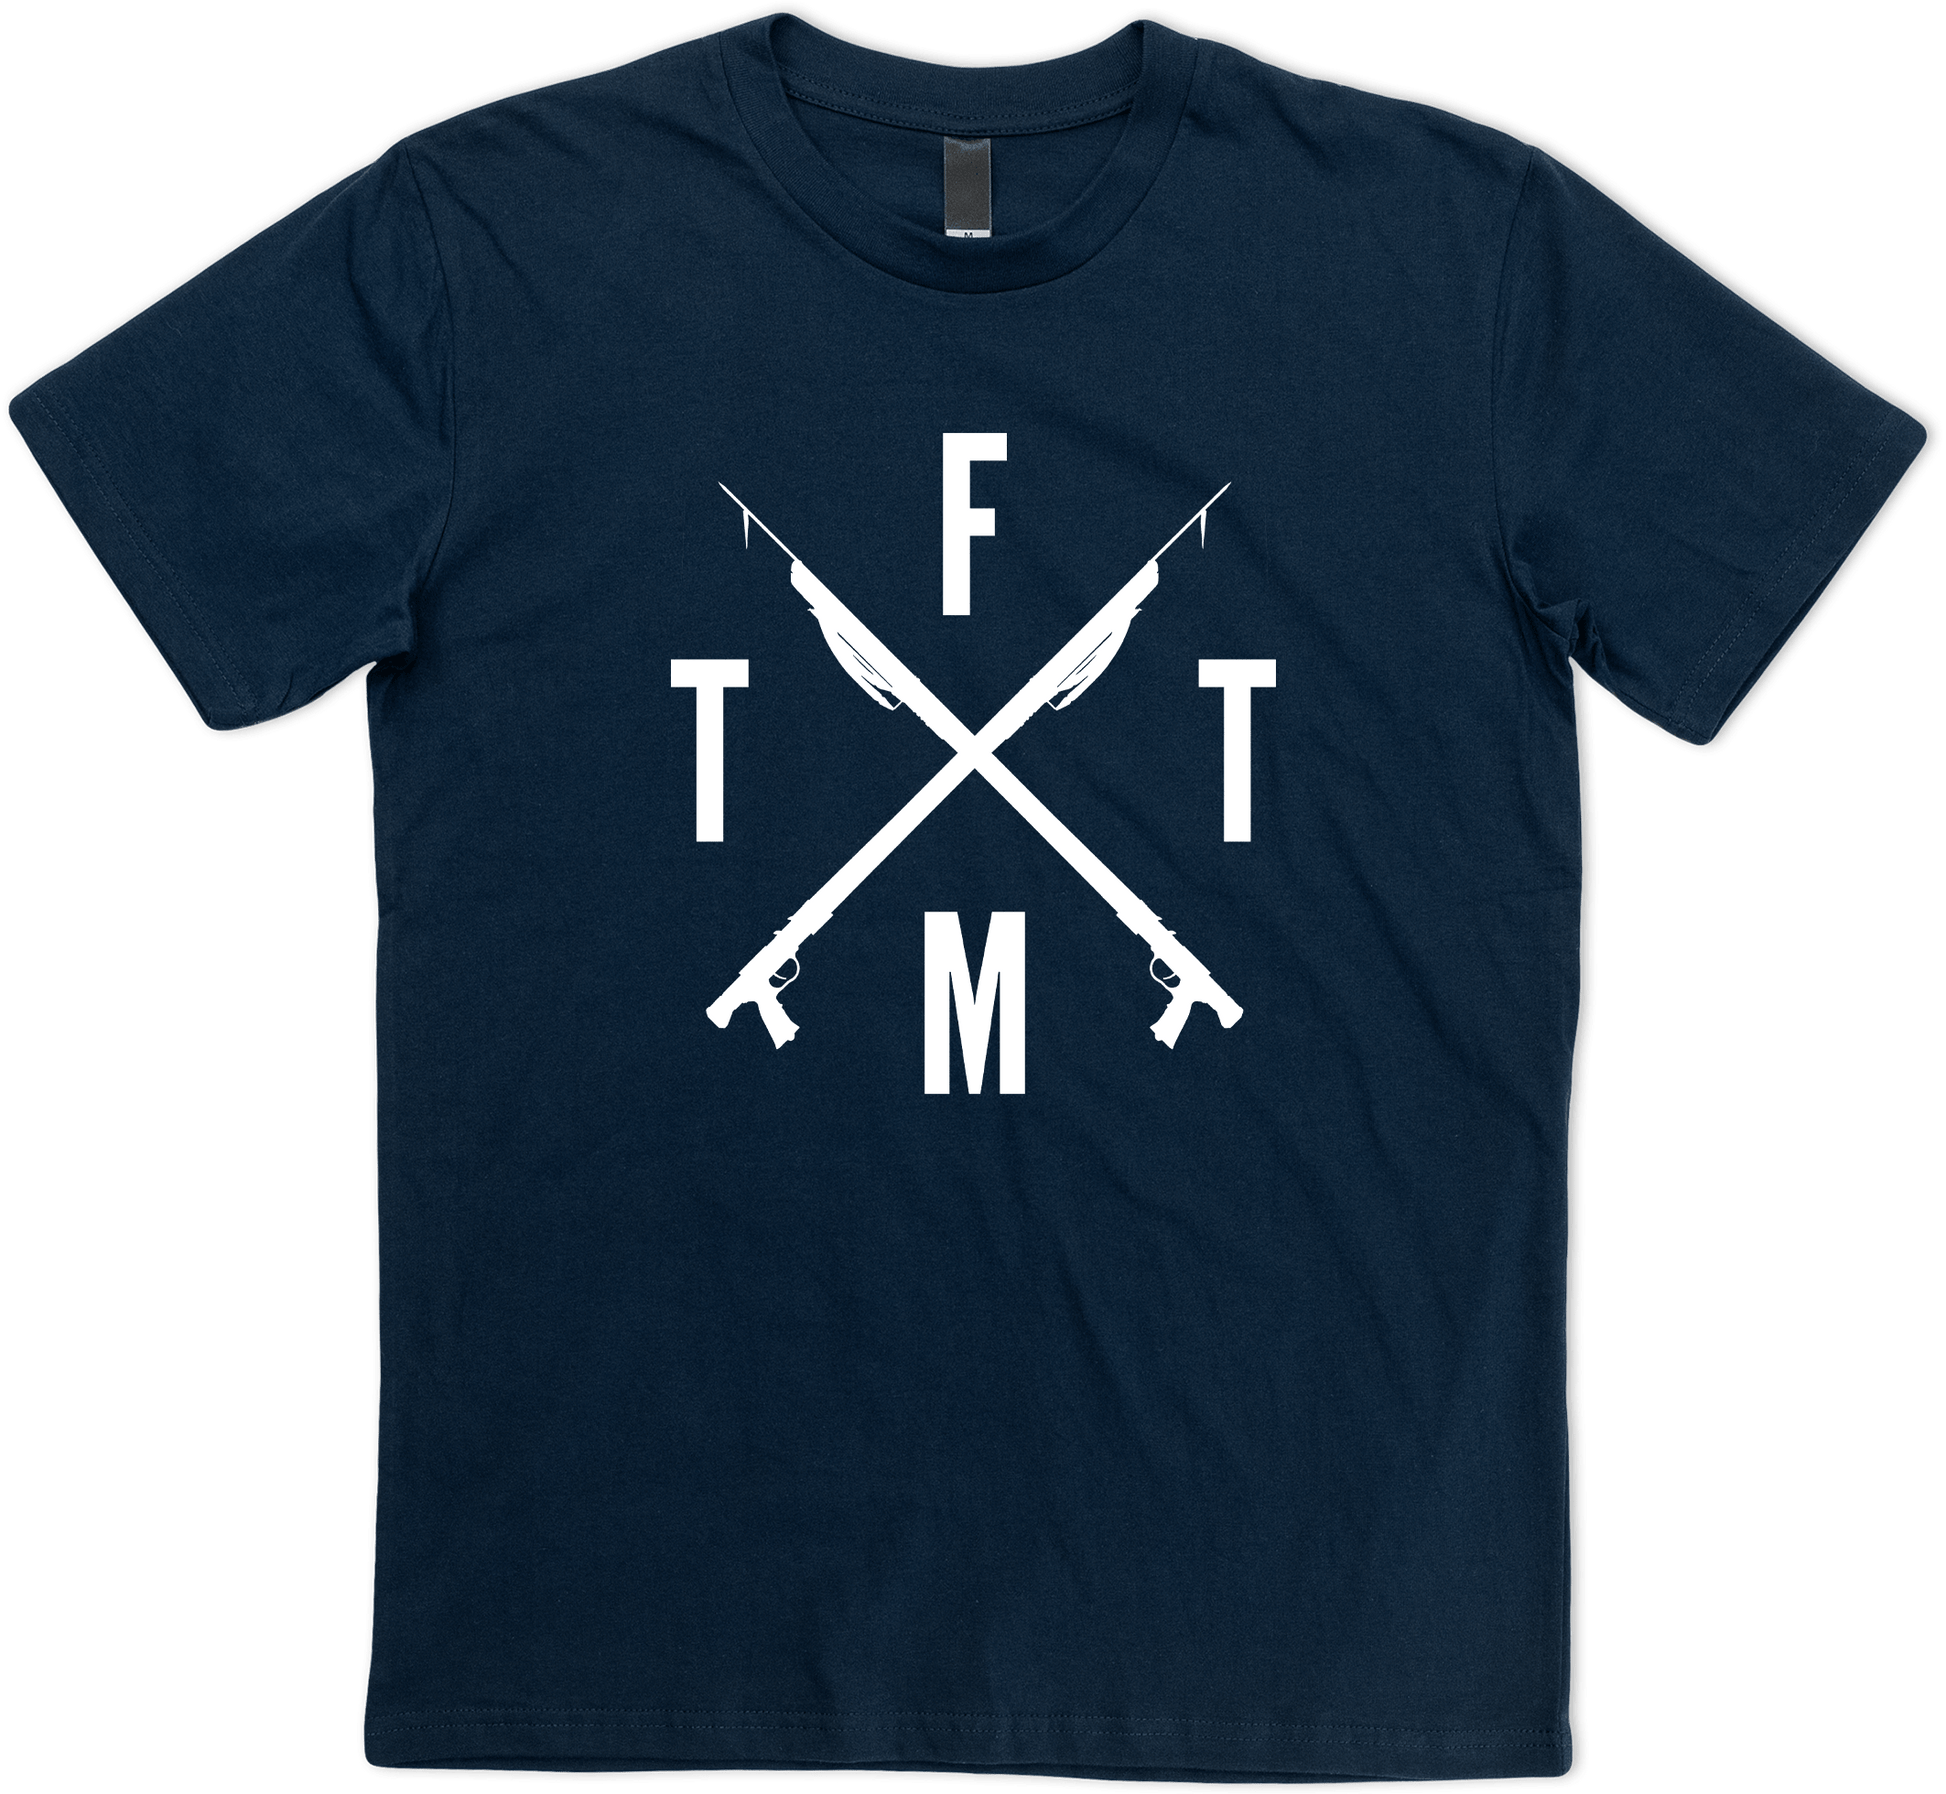 Spearfishing T-shirt. Two Spearguns